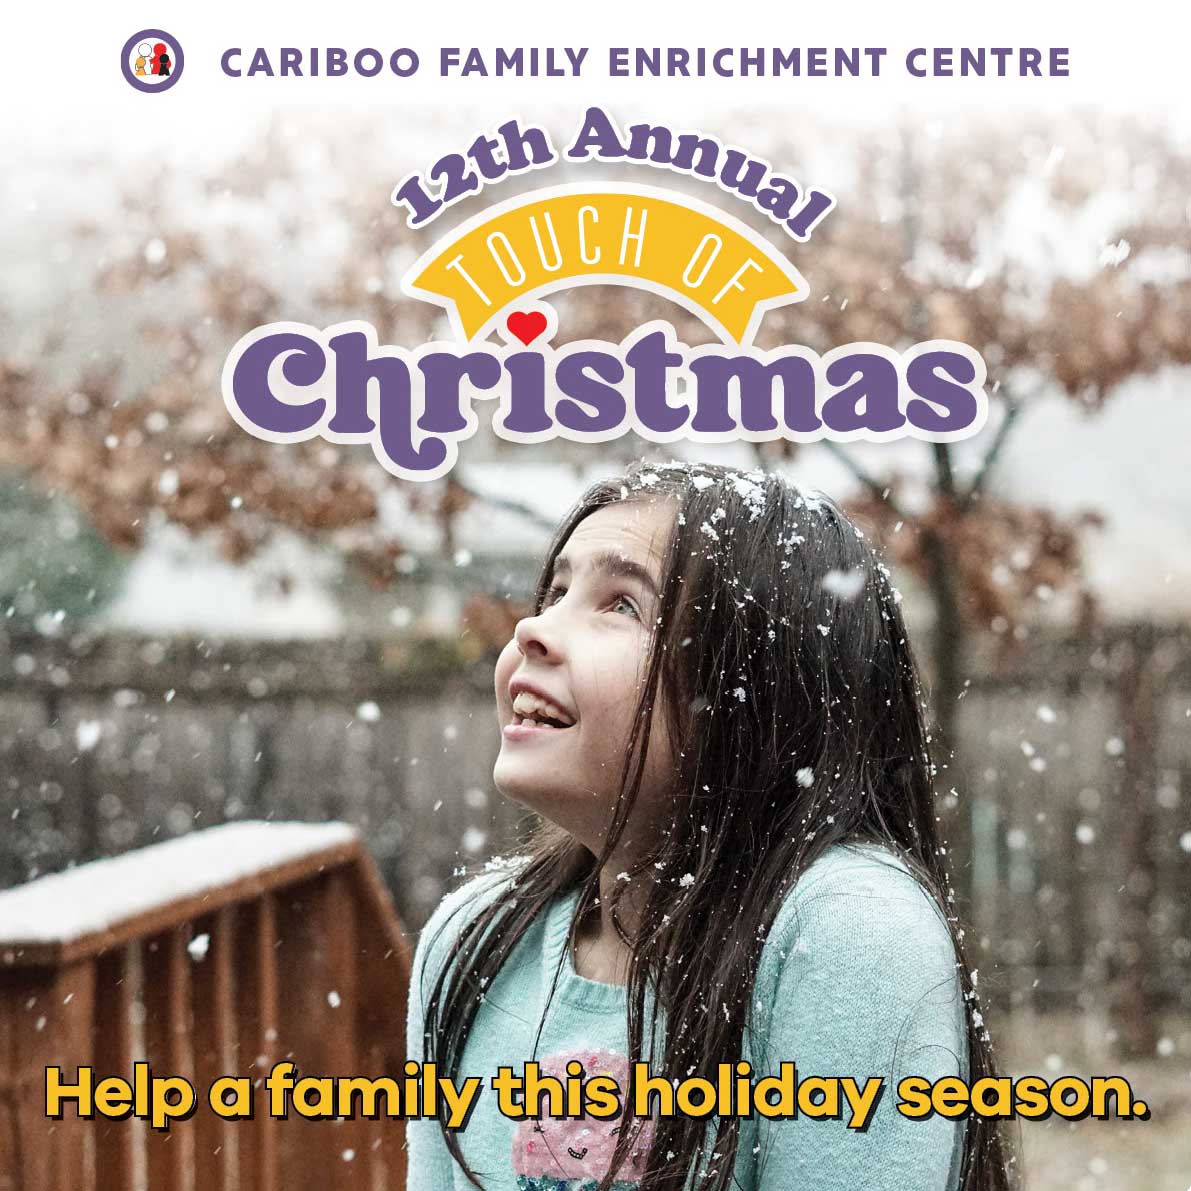 Photograph with text: Image of girl looking at falling snow and smiling. Text reads Cariboo Family Enrichment Centre 12th Annual Touch of Christmas. Help a family this holiday season.